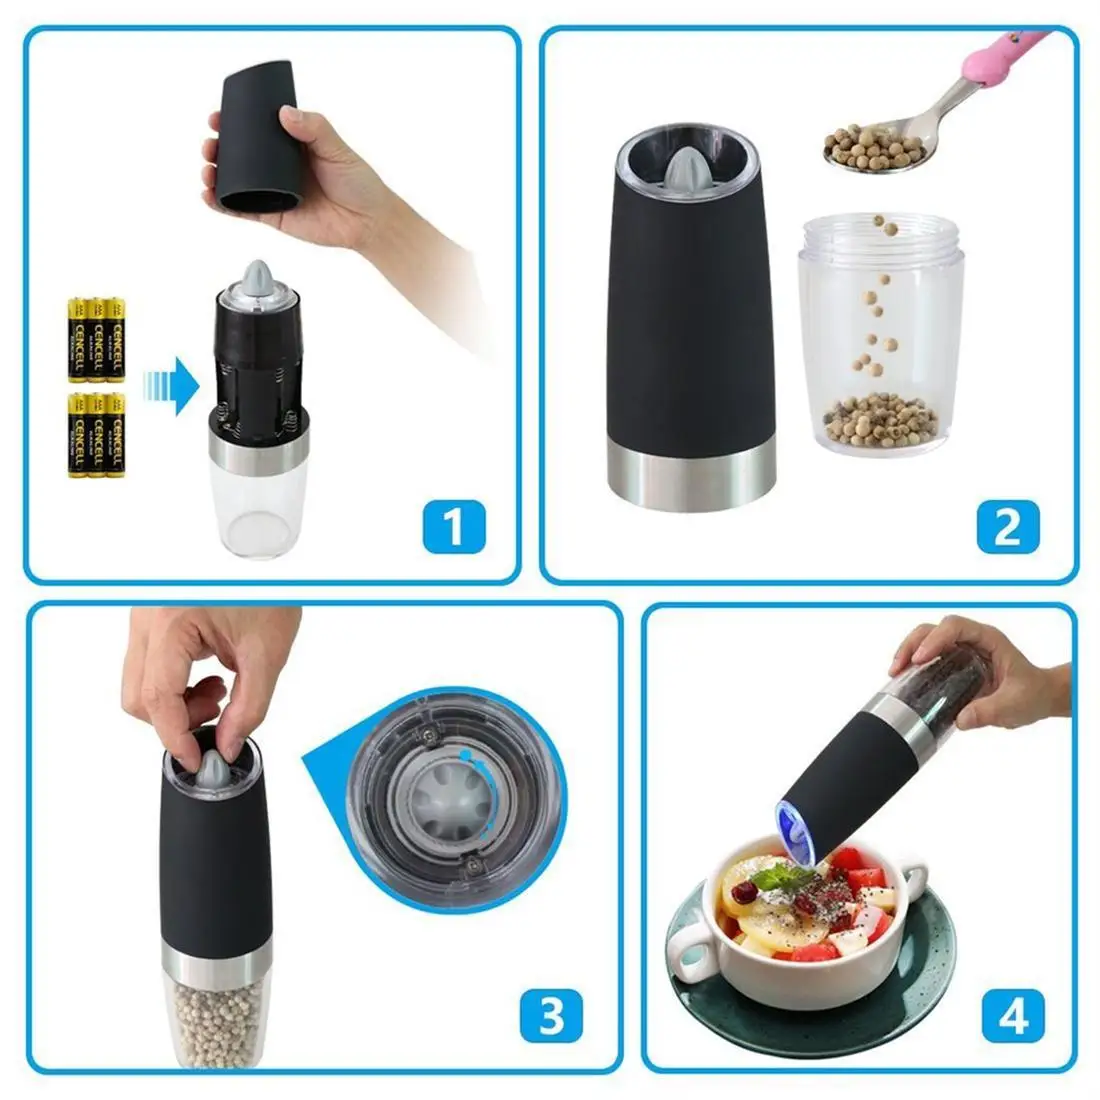 Set of 2 Electric Gravity Pepper& Salt Grinder with LED Light Automatic Adjustable Pepper Spice Mill Kitchen Grinding Tools